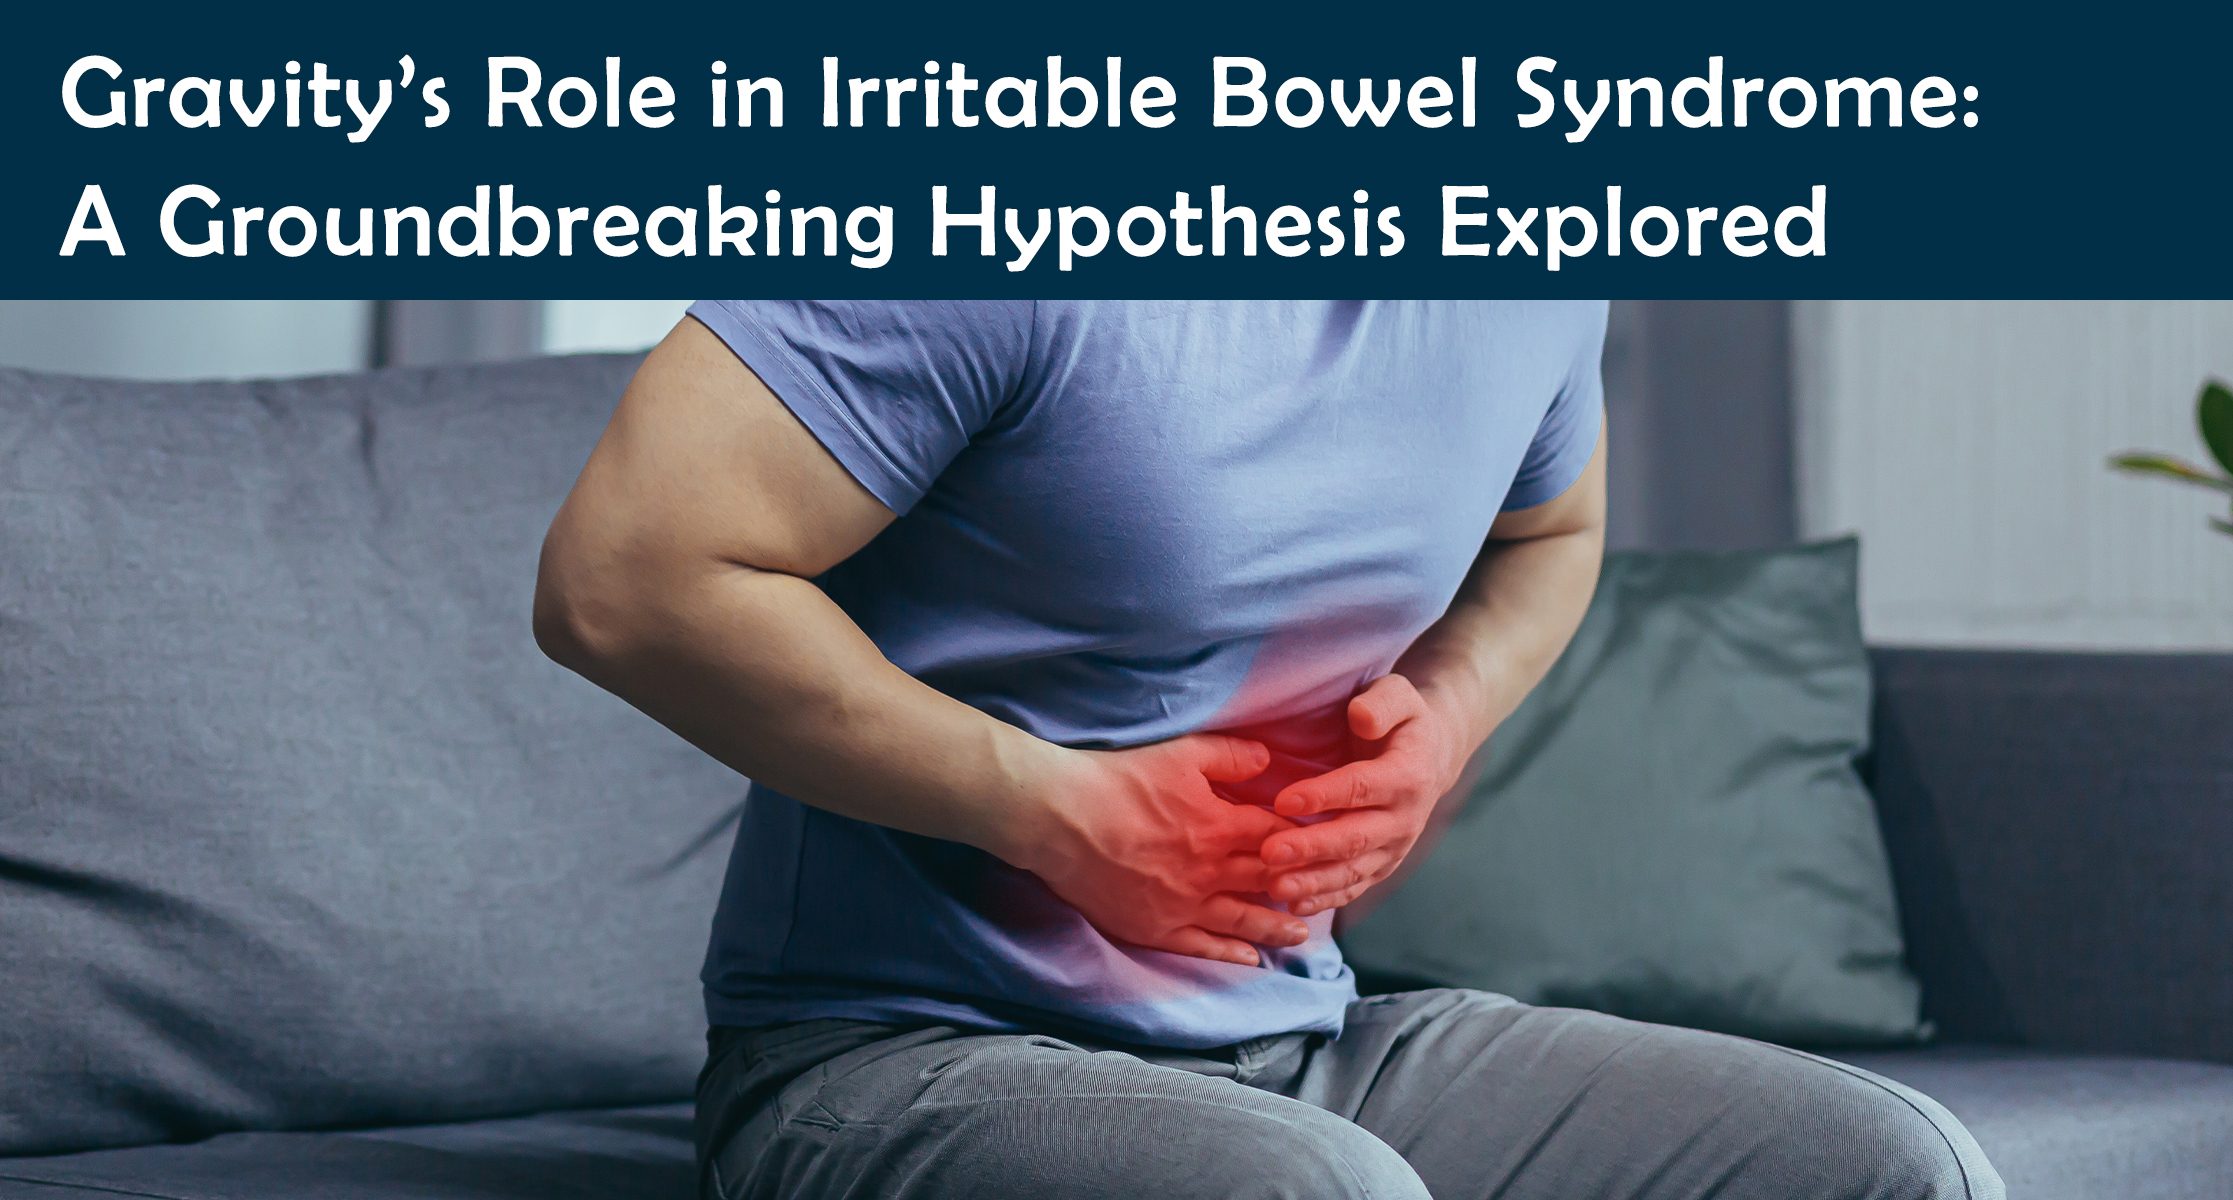 Gravity’s Role in Irritable Bowel Syndrome: A Groundbreaking Hypothesis Explored